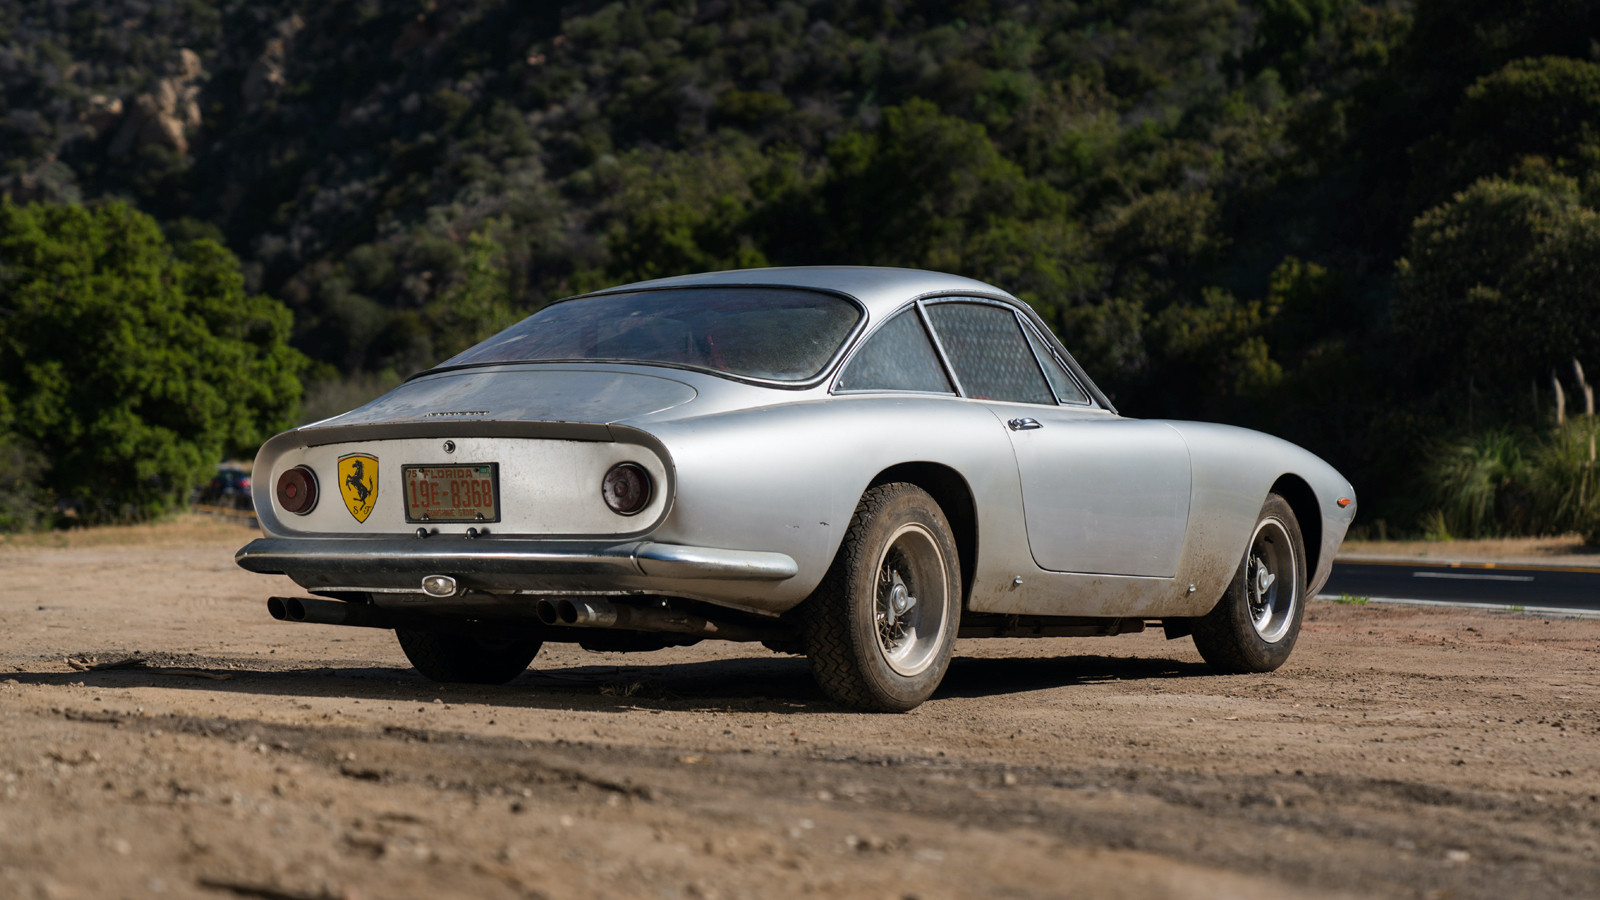 This barn-find Ferrari just sold for $1.3m